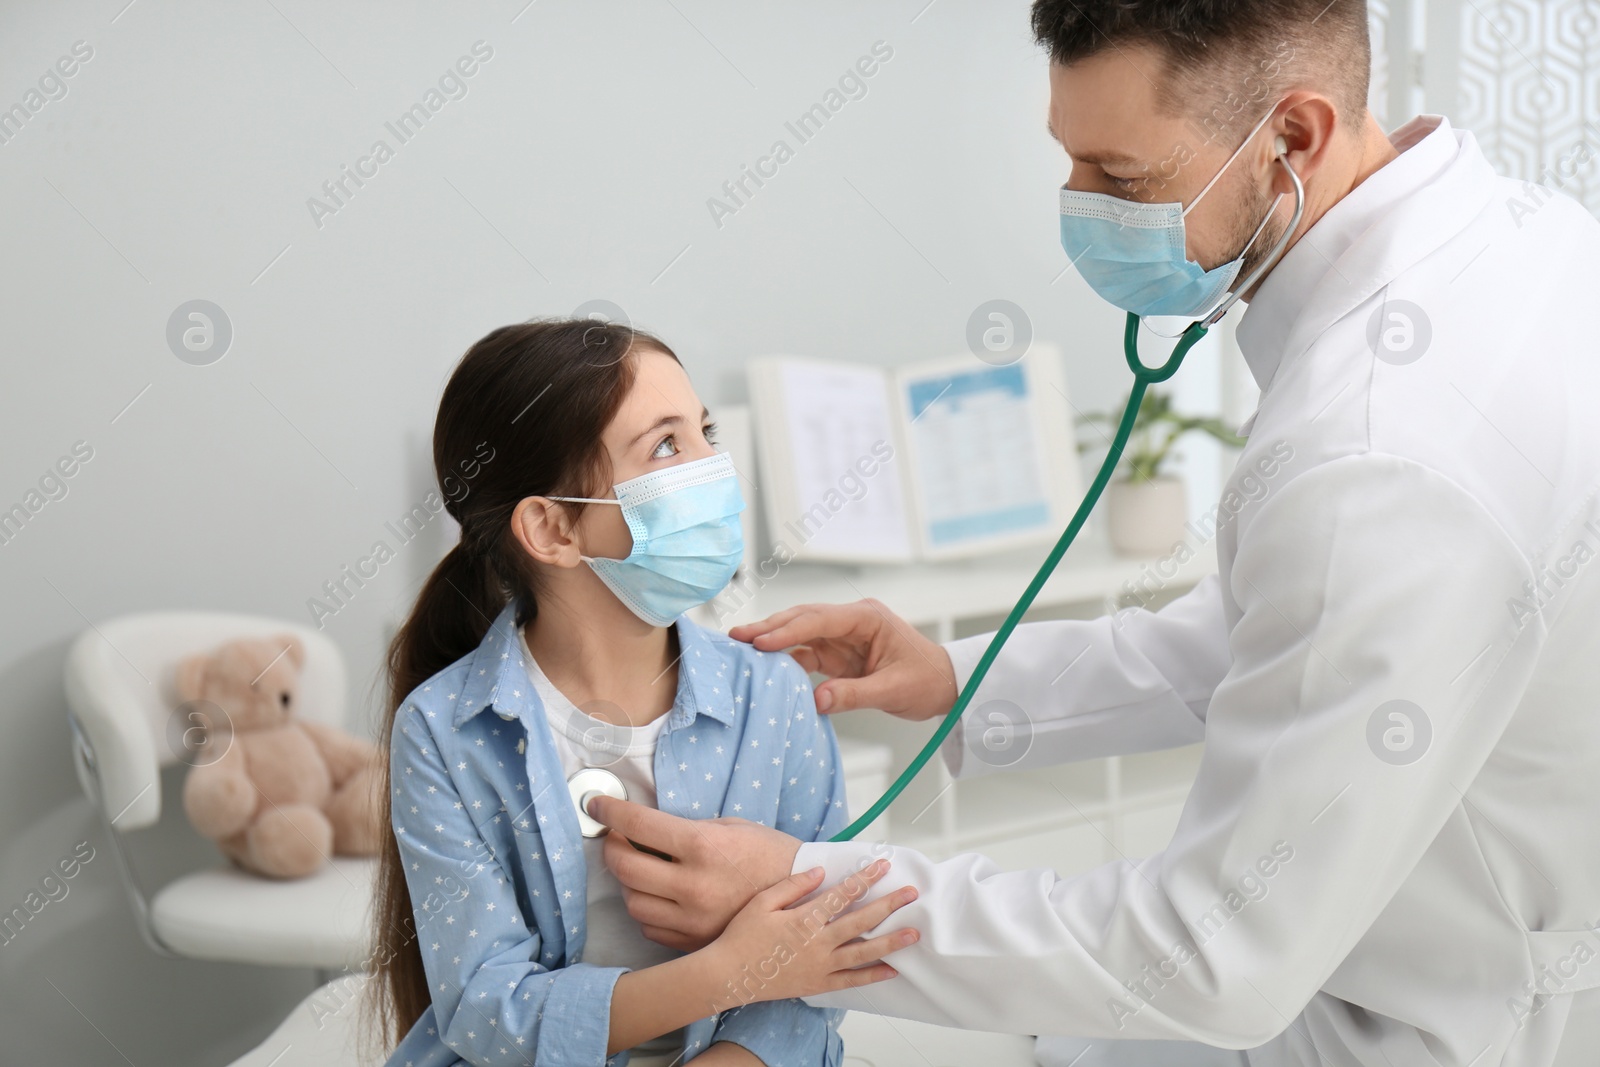 Photo of Pediatrician examining little girl in hospital. Doctor and patient wearing protective masks